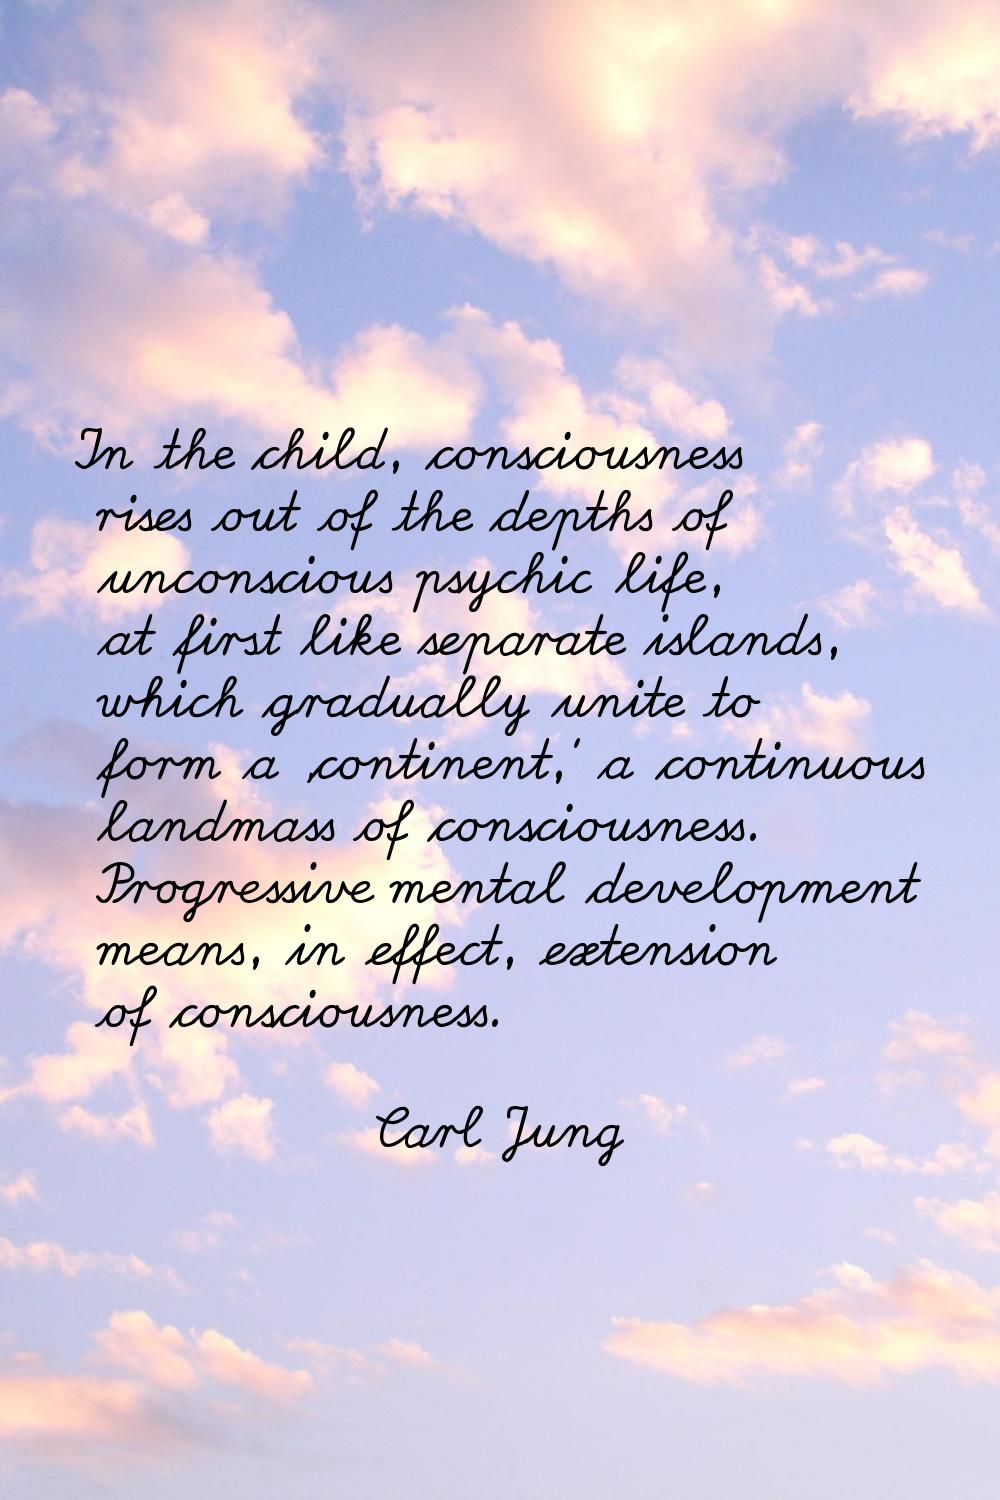 In the child, consciousness rises out of the depths of unconscious psychic life, at first like sepa